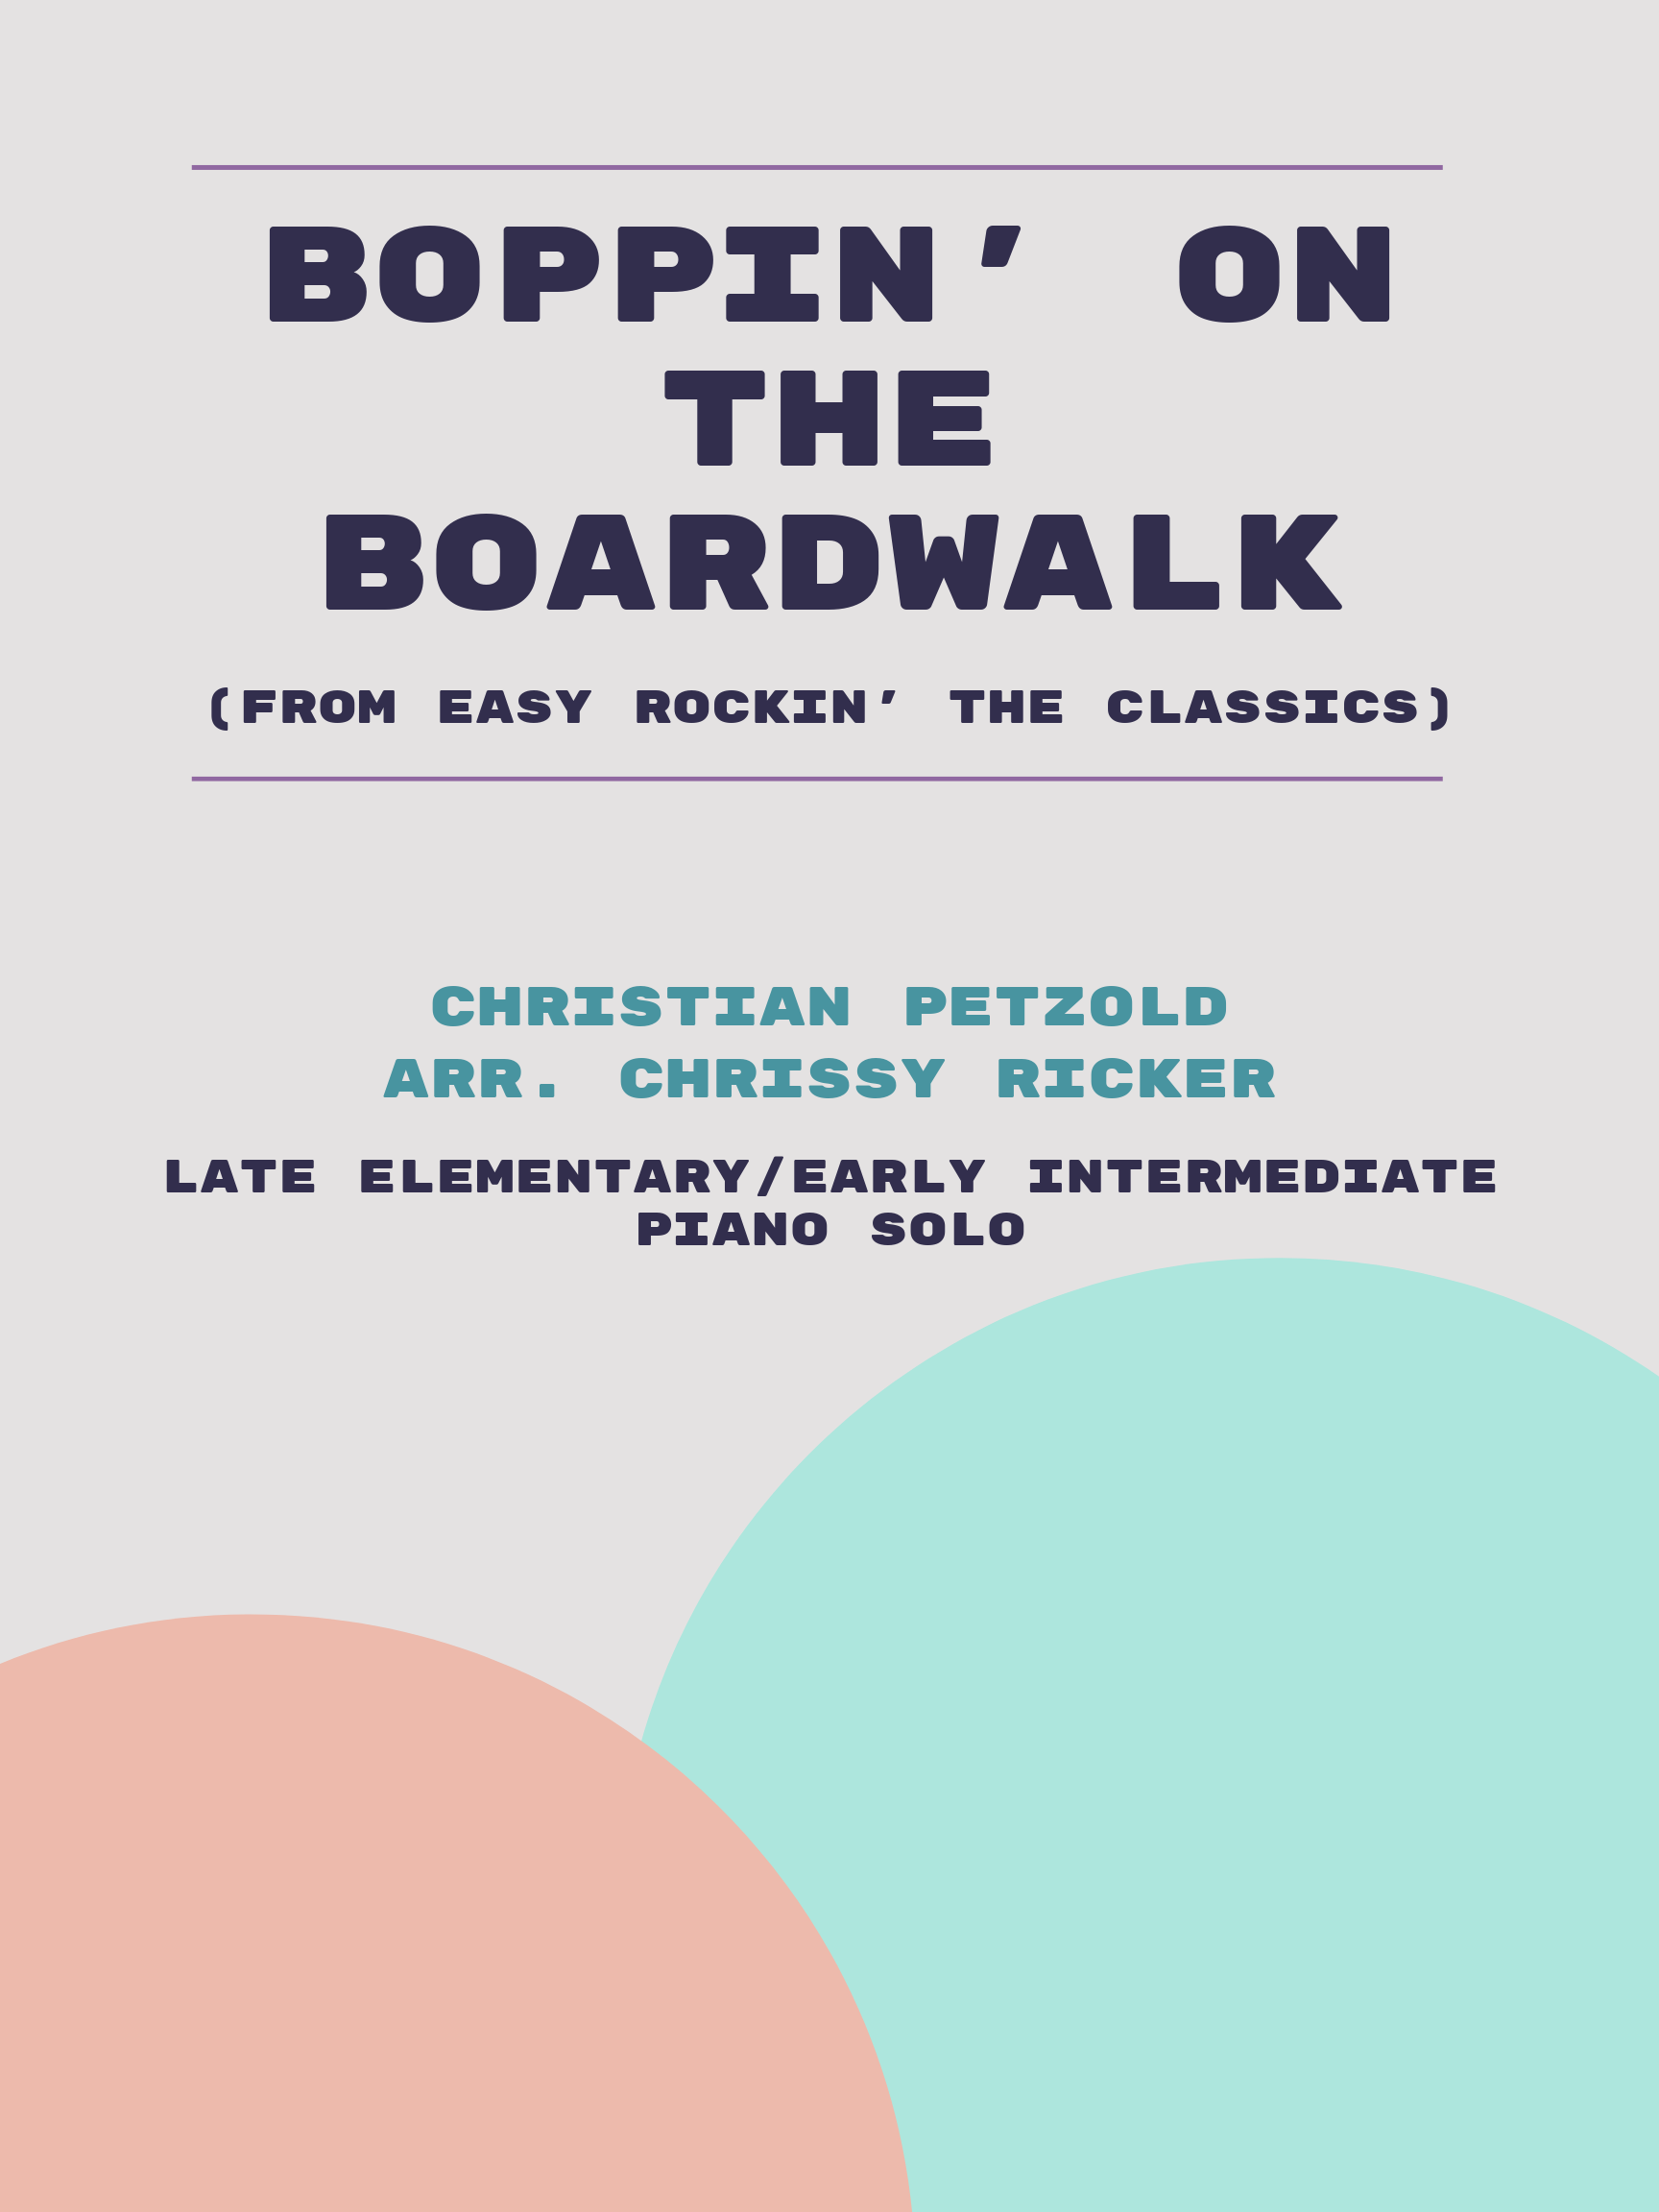 Boppin' on the Boardwalk Sample Page